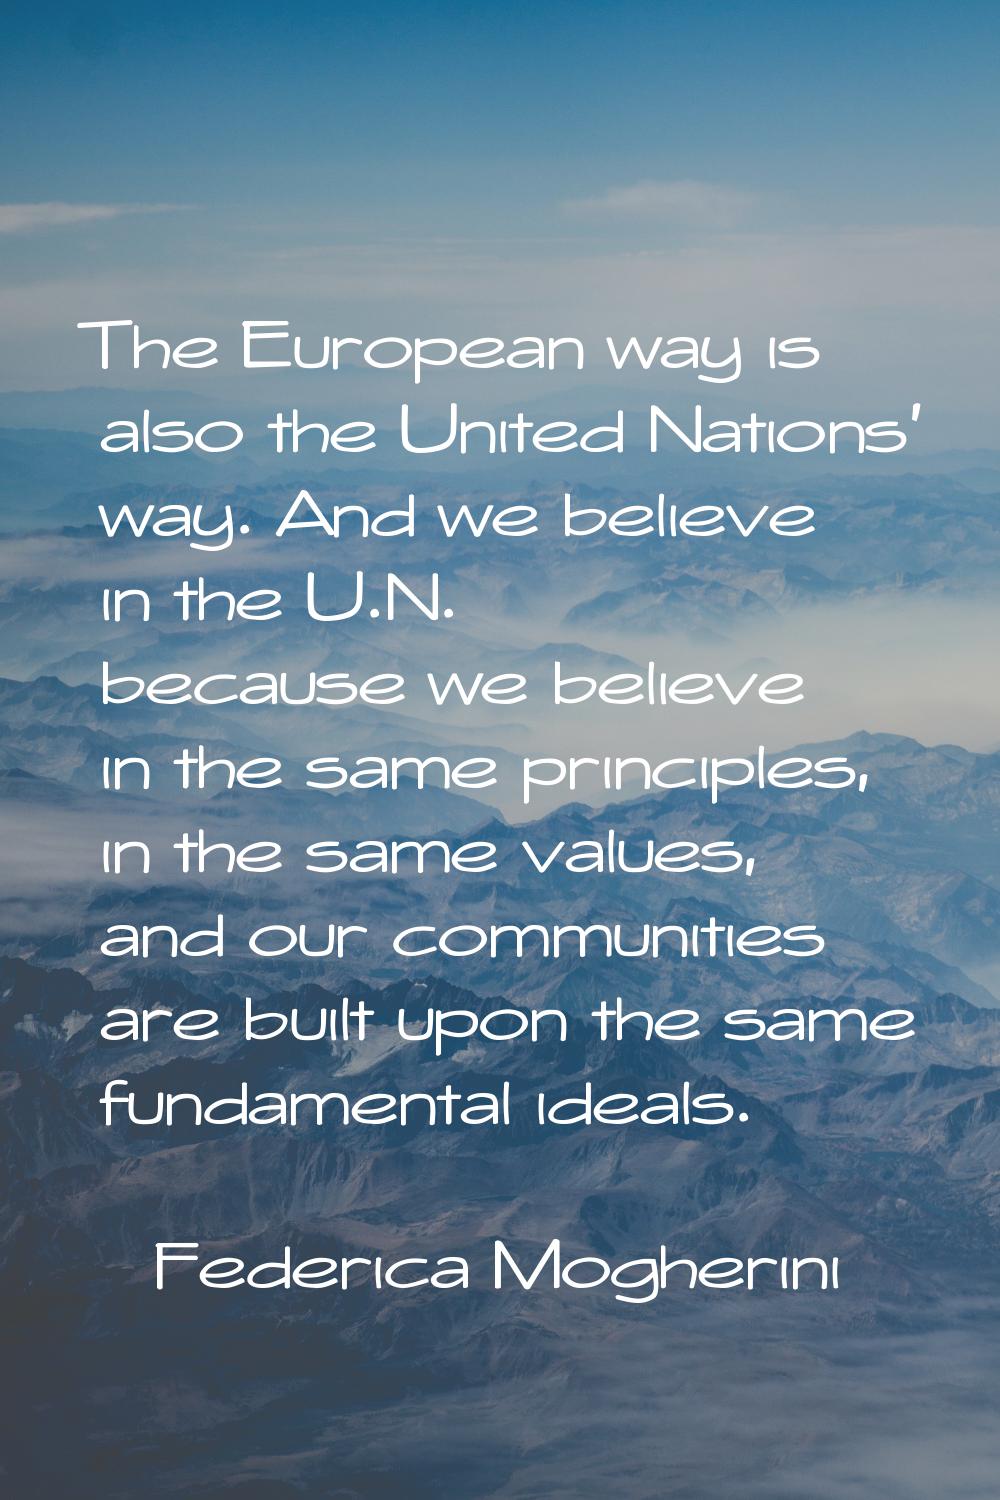 The European way is also the United Nations' way. And we believe in the U.N. because we believe in 